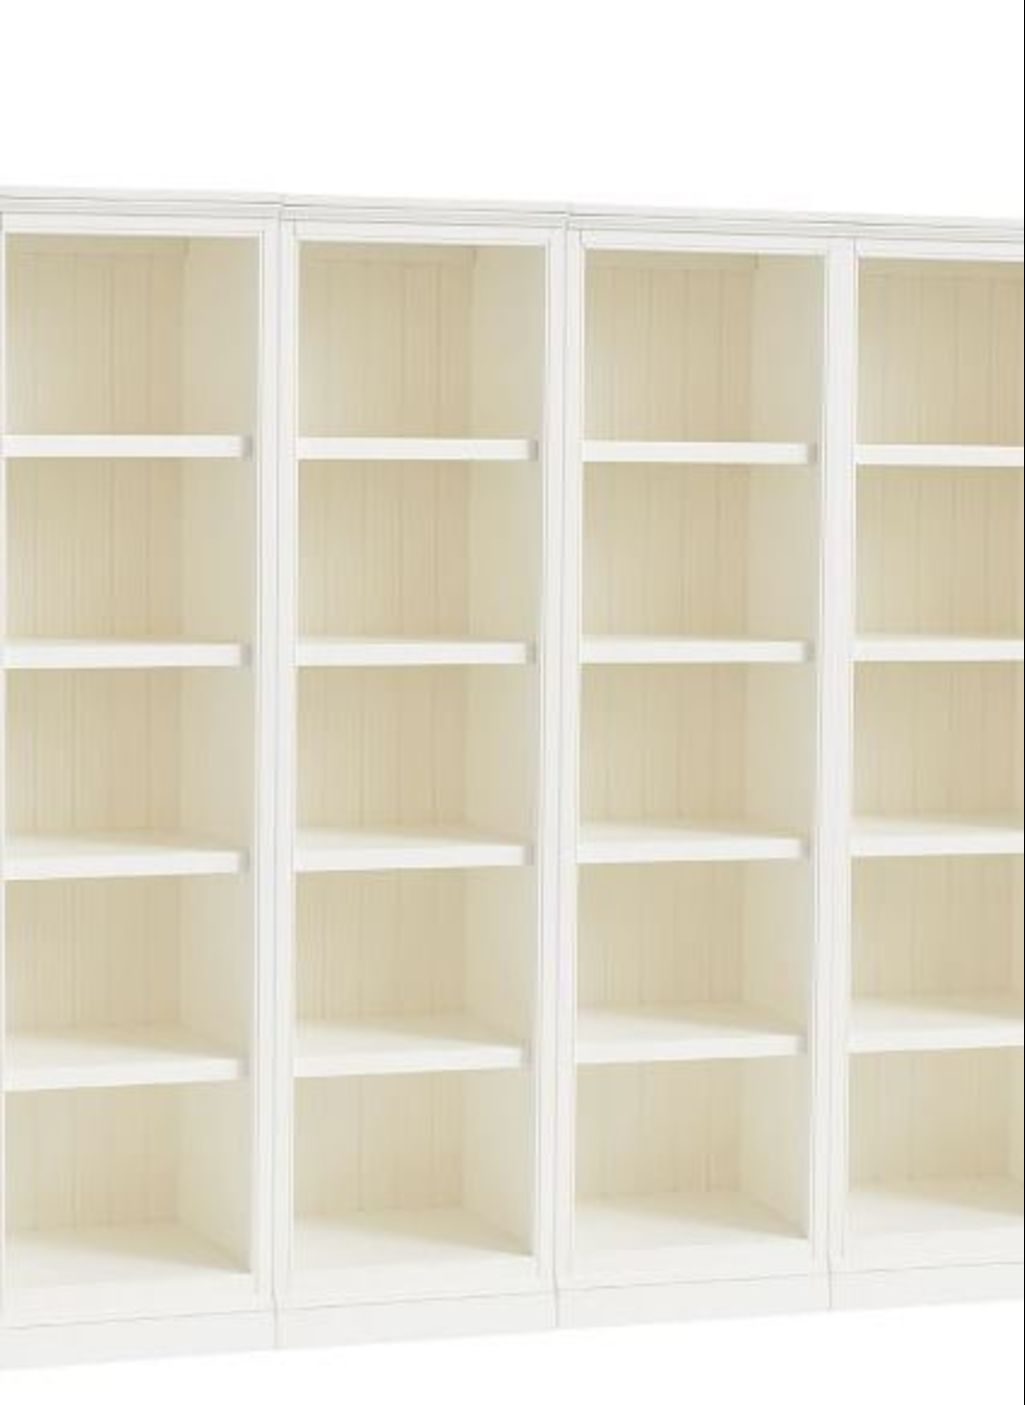 Use Wooden Bookshelves Maximize and Organize Your Basement Space 